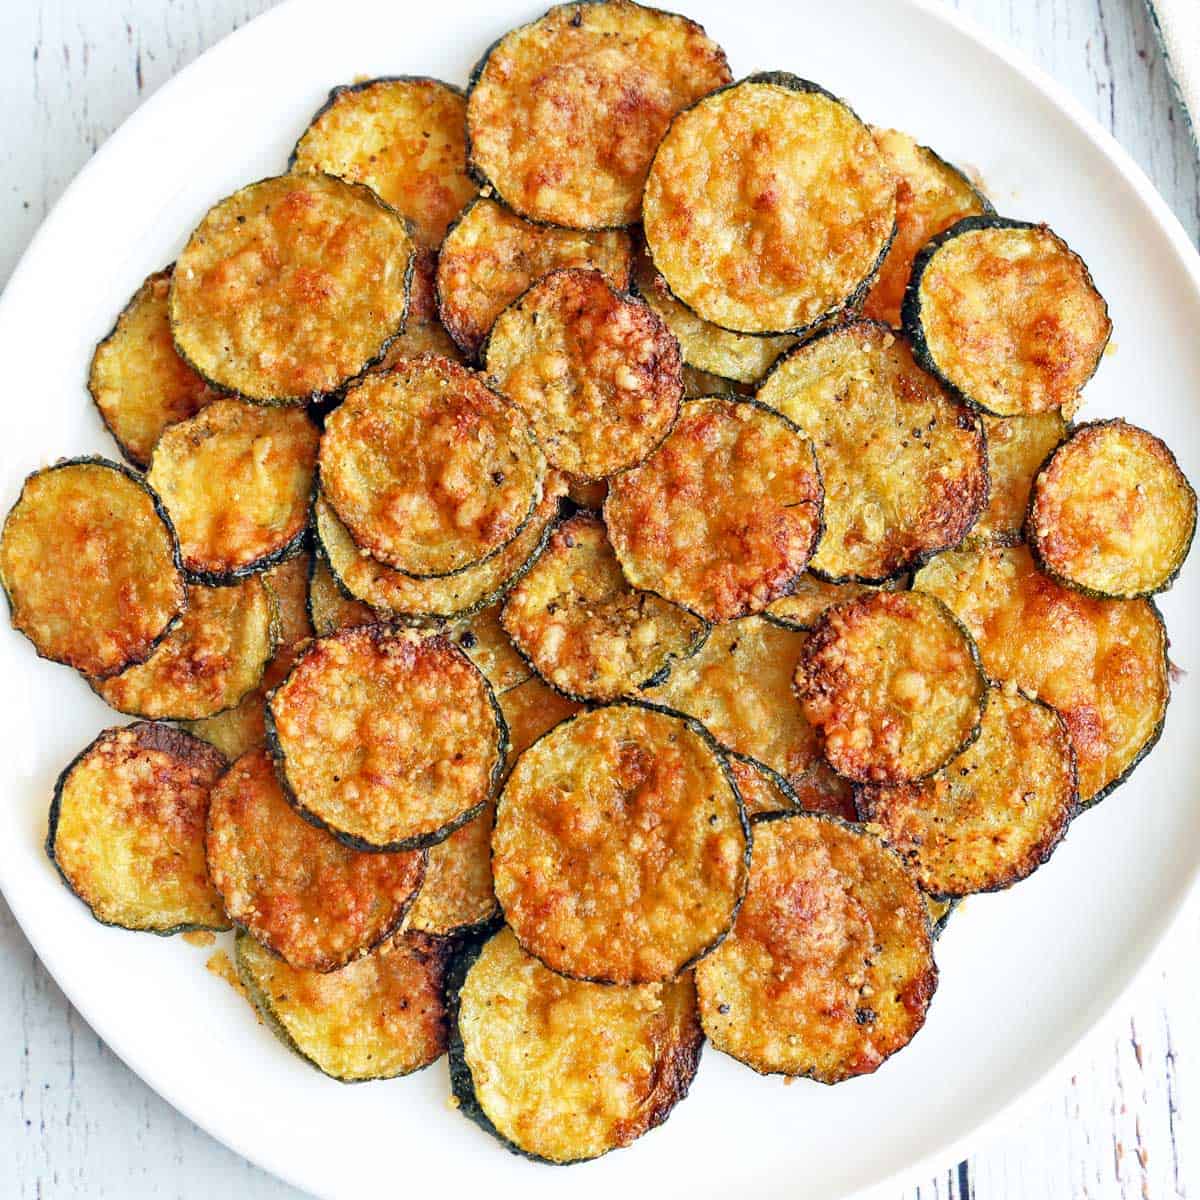 How To Store Zucchini Chips